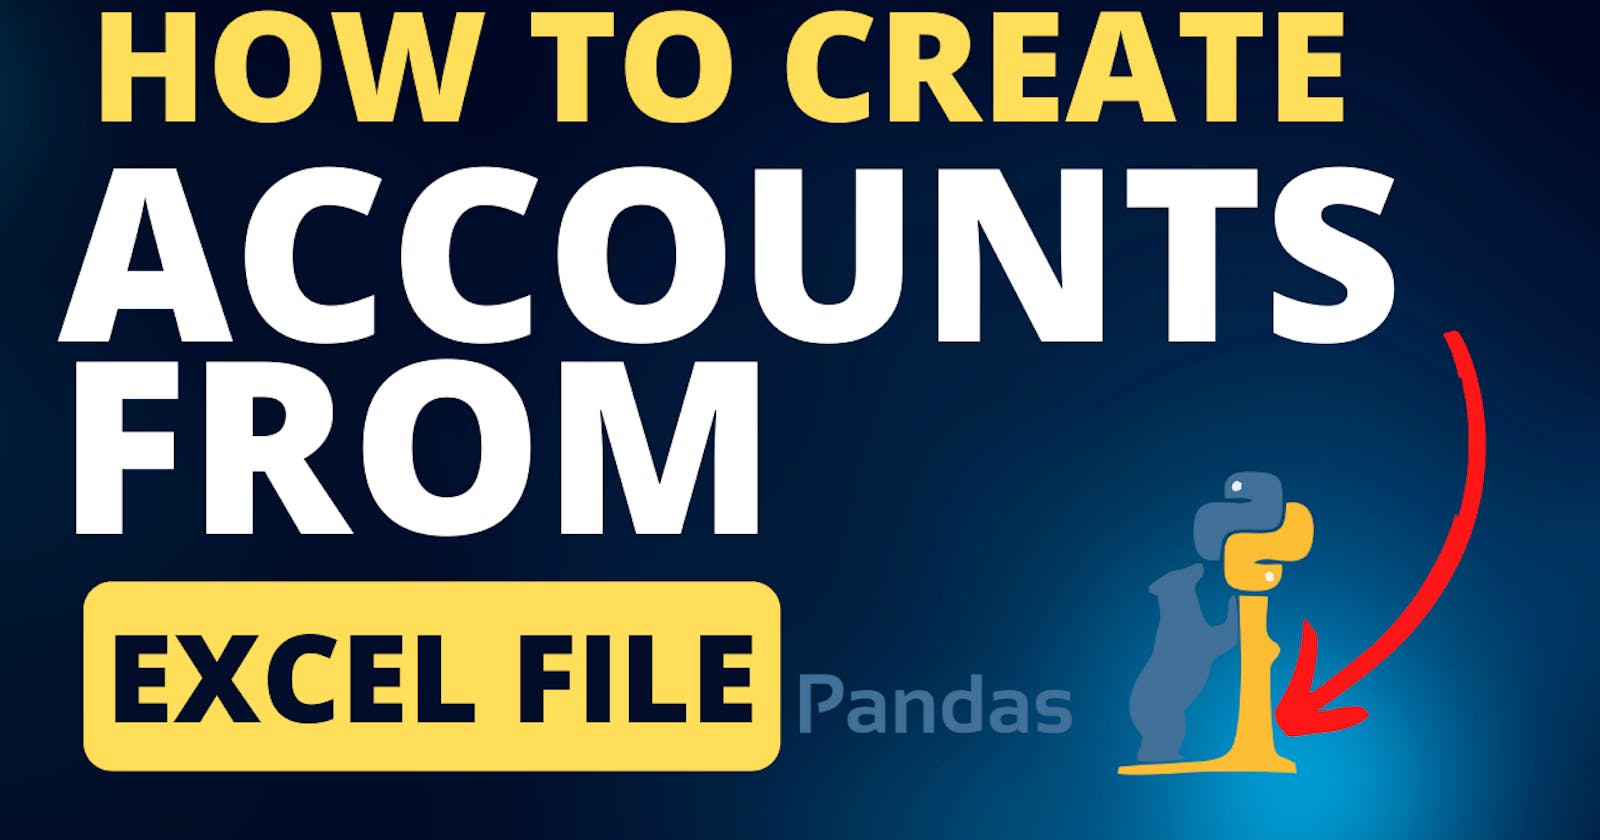 Create Account from Excel File !!